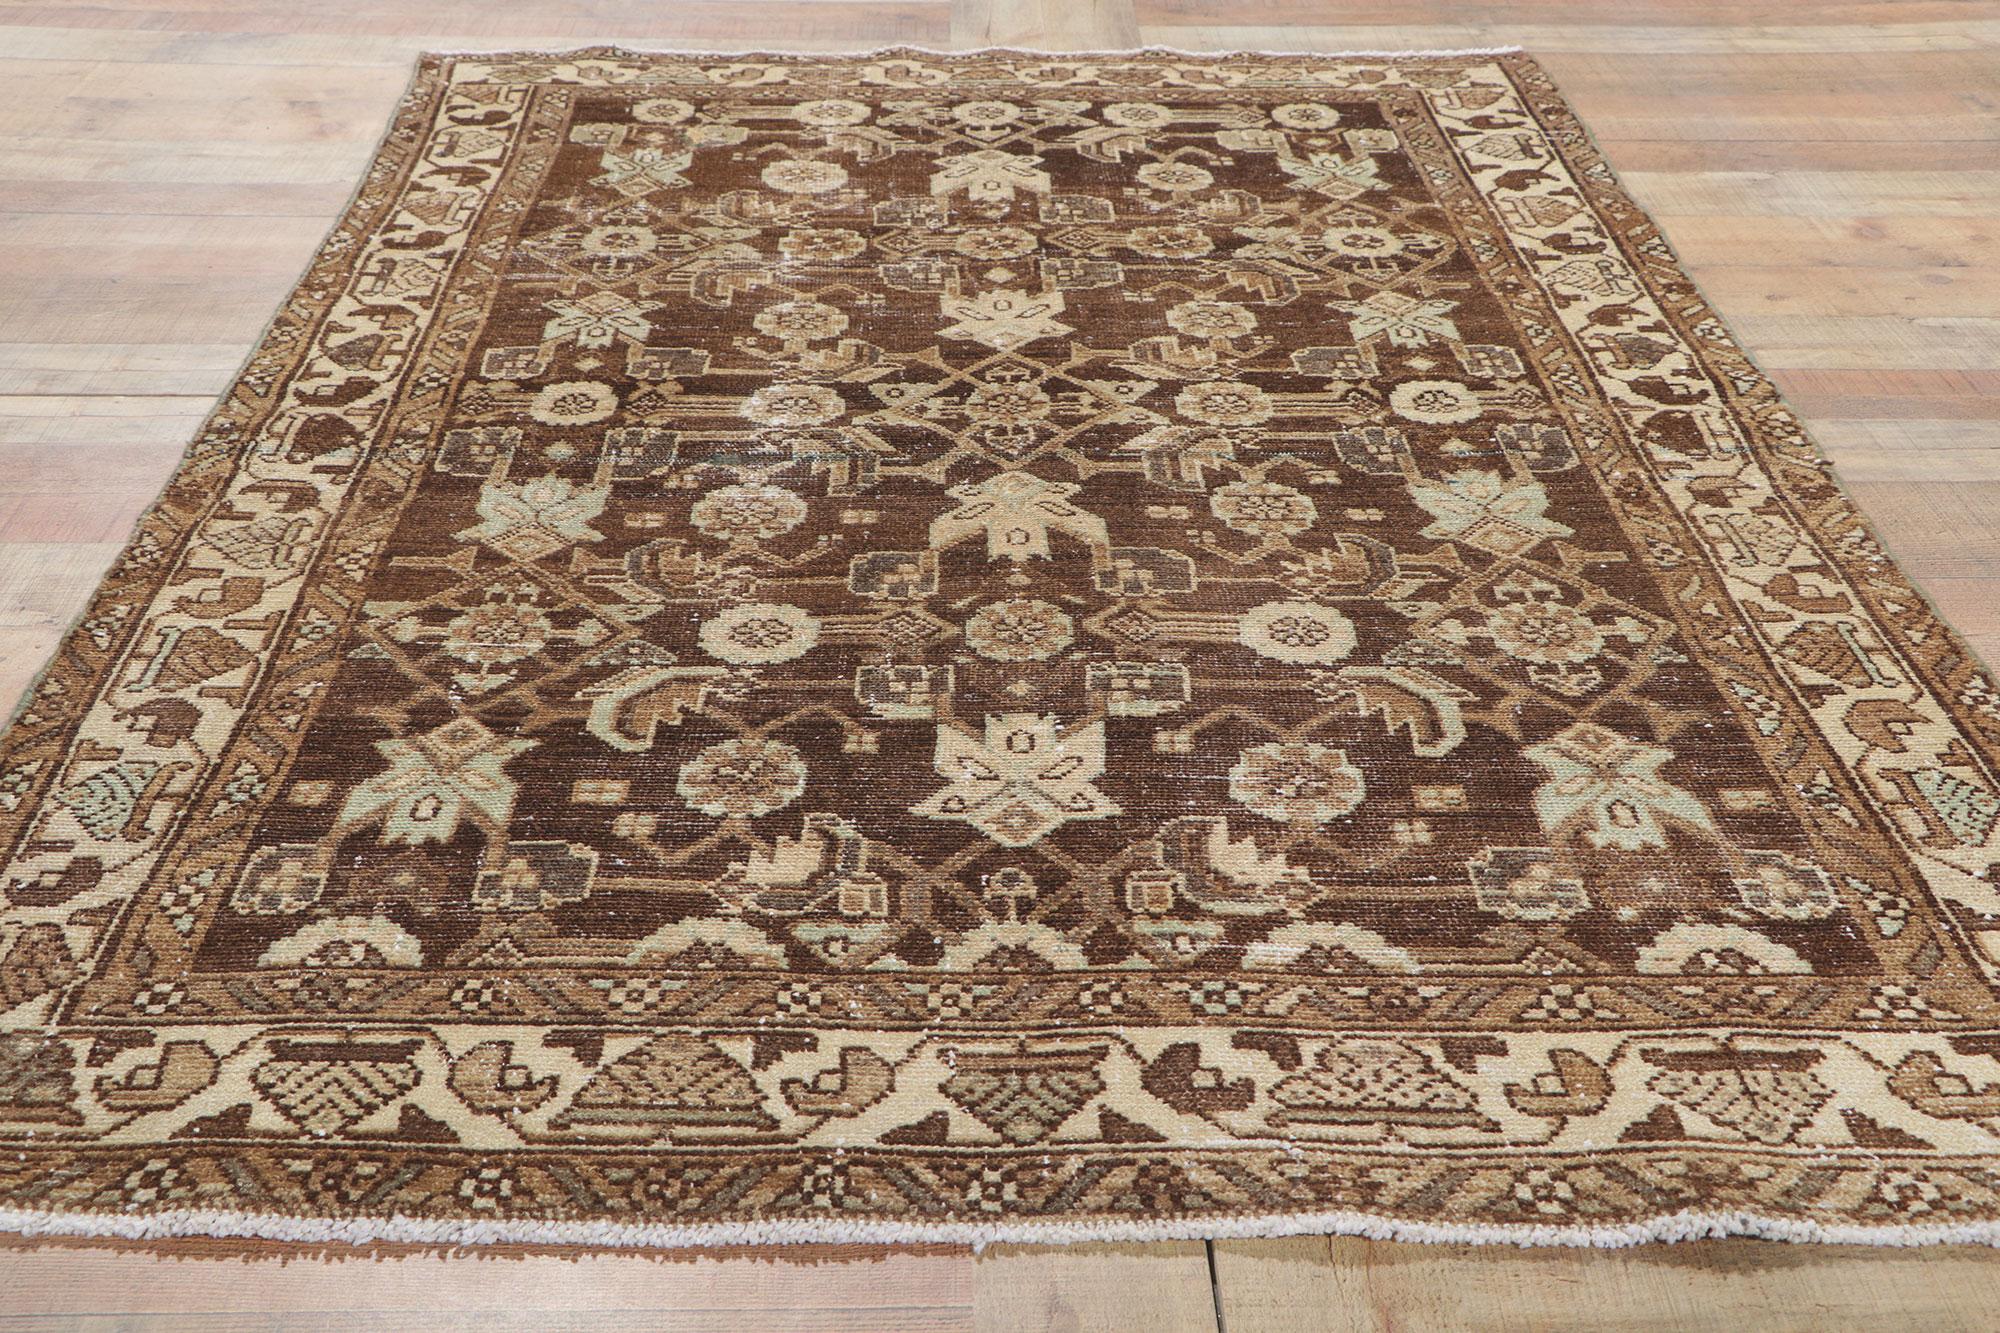 Antique-Worn Persian Malayer Rug, Midcentury Modern Meets Weathered Finesse For Sale 3